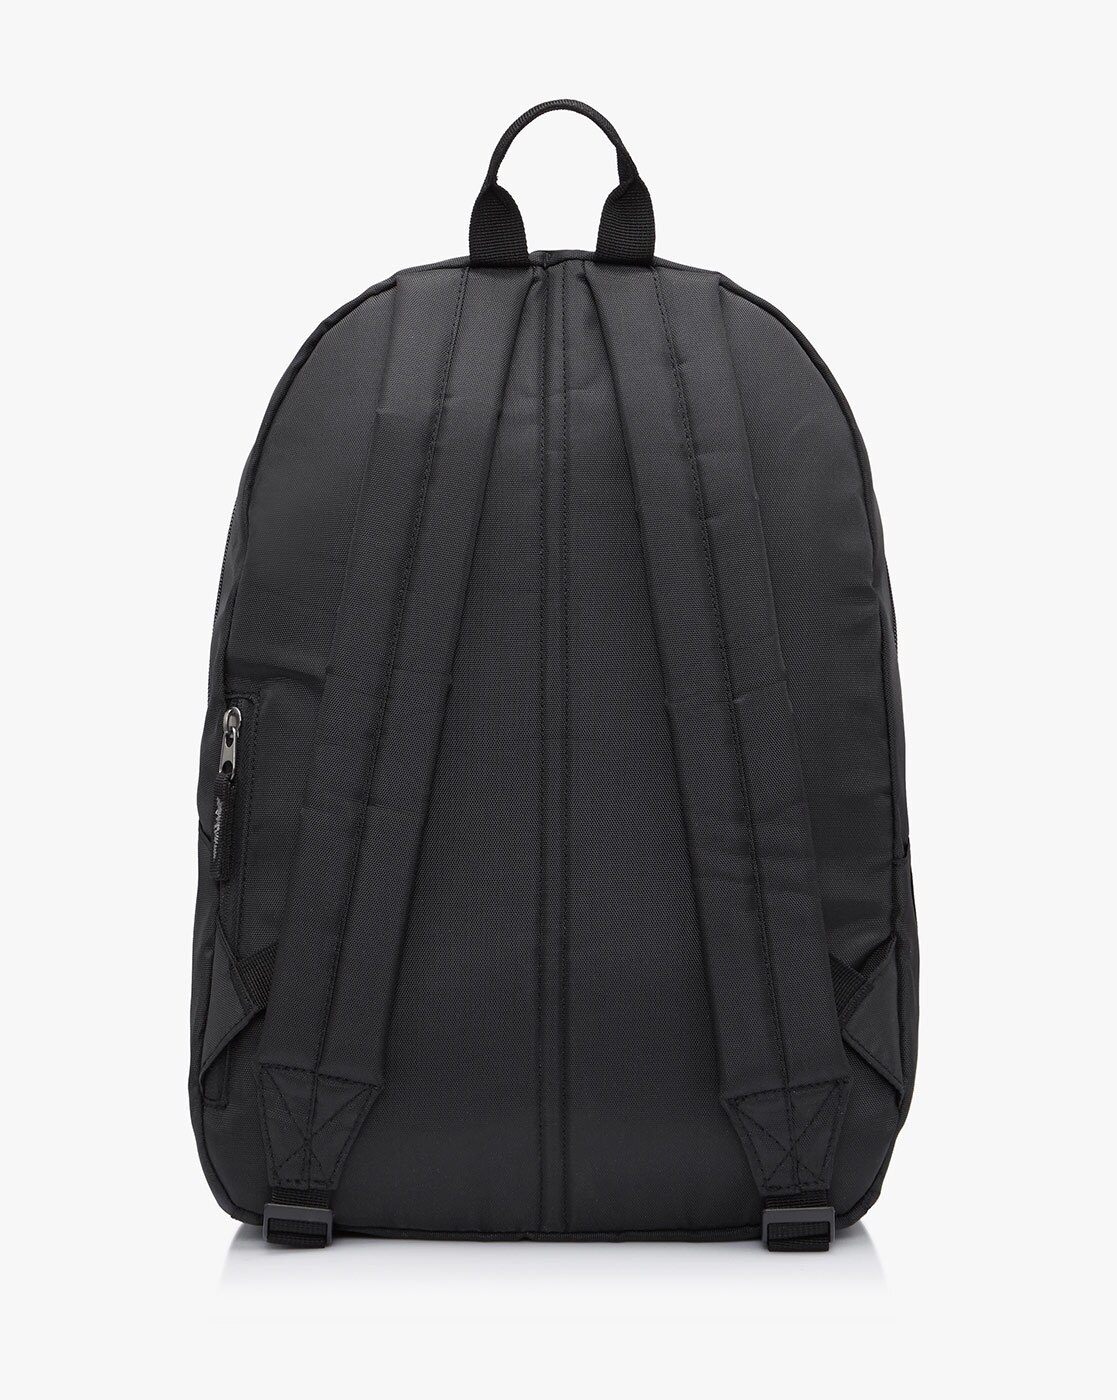 american tourister black backpack